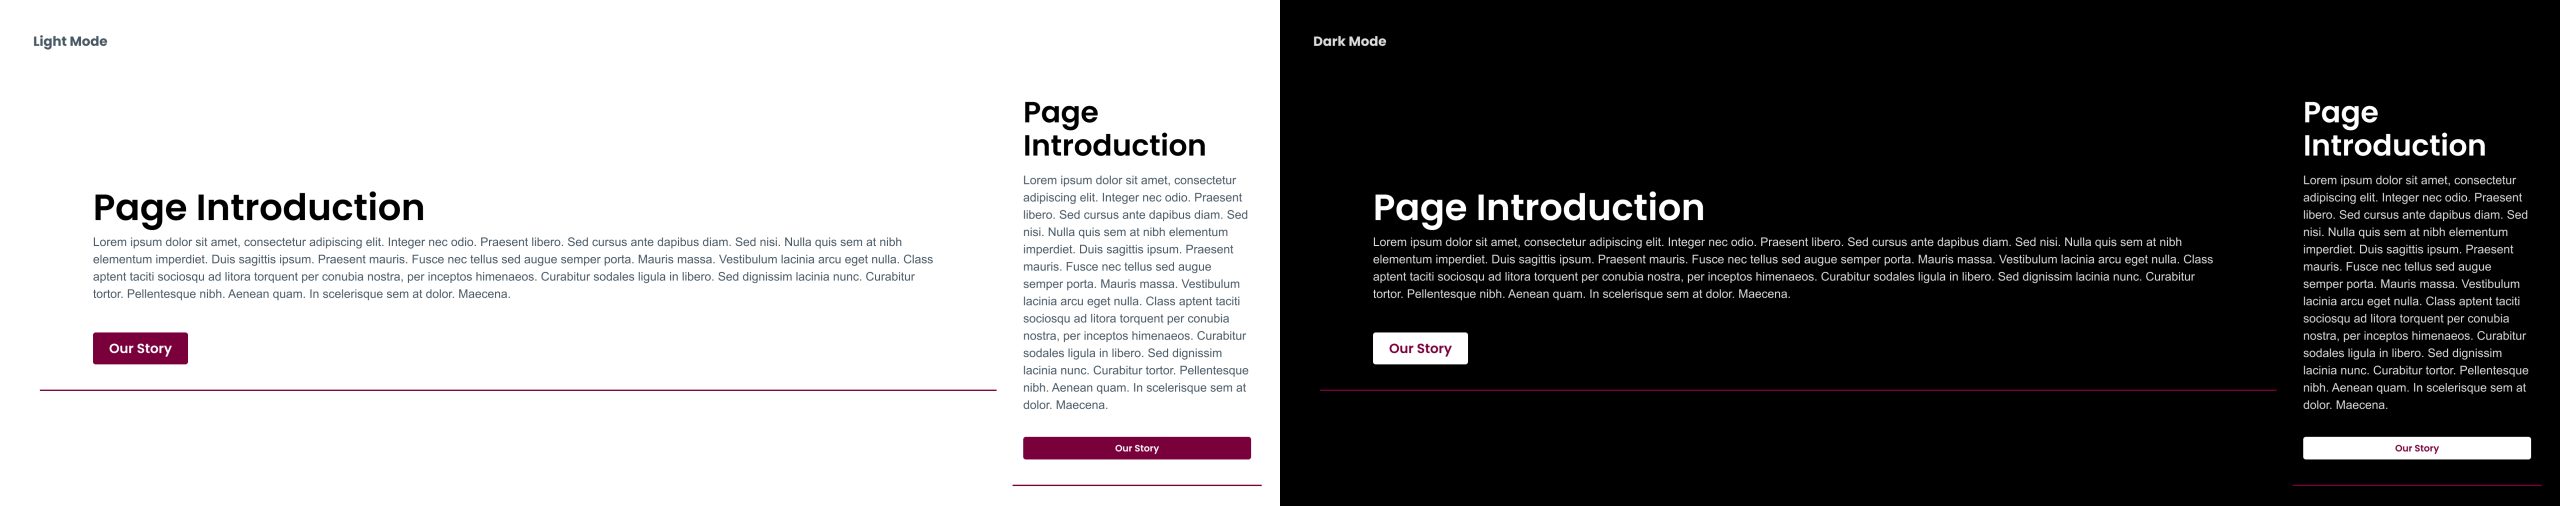 examples of page introductions on desktop and mobile in light and dark mode